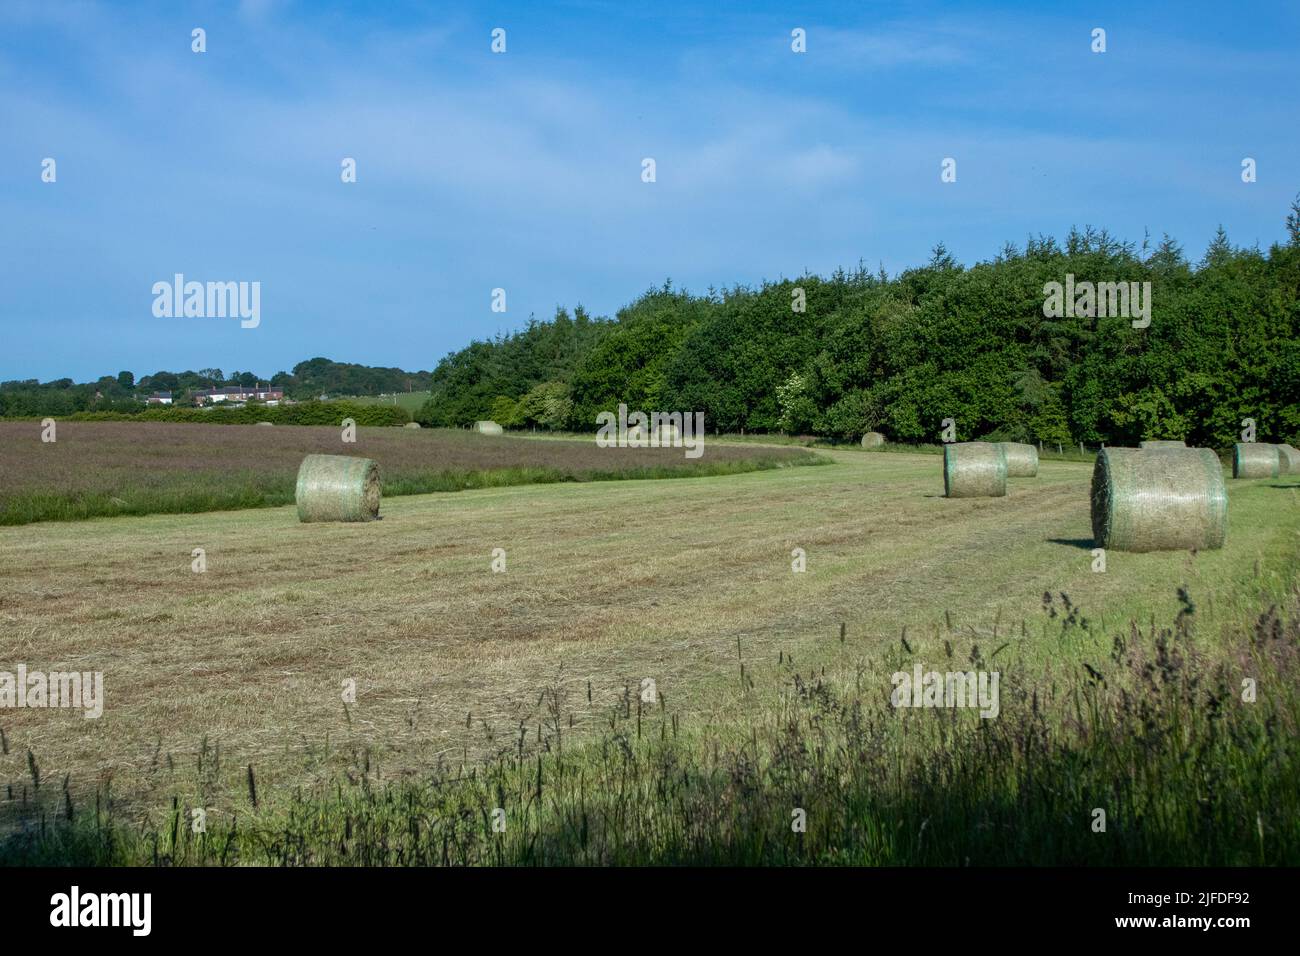 Straw/hay bales in field Stock Photo